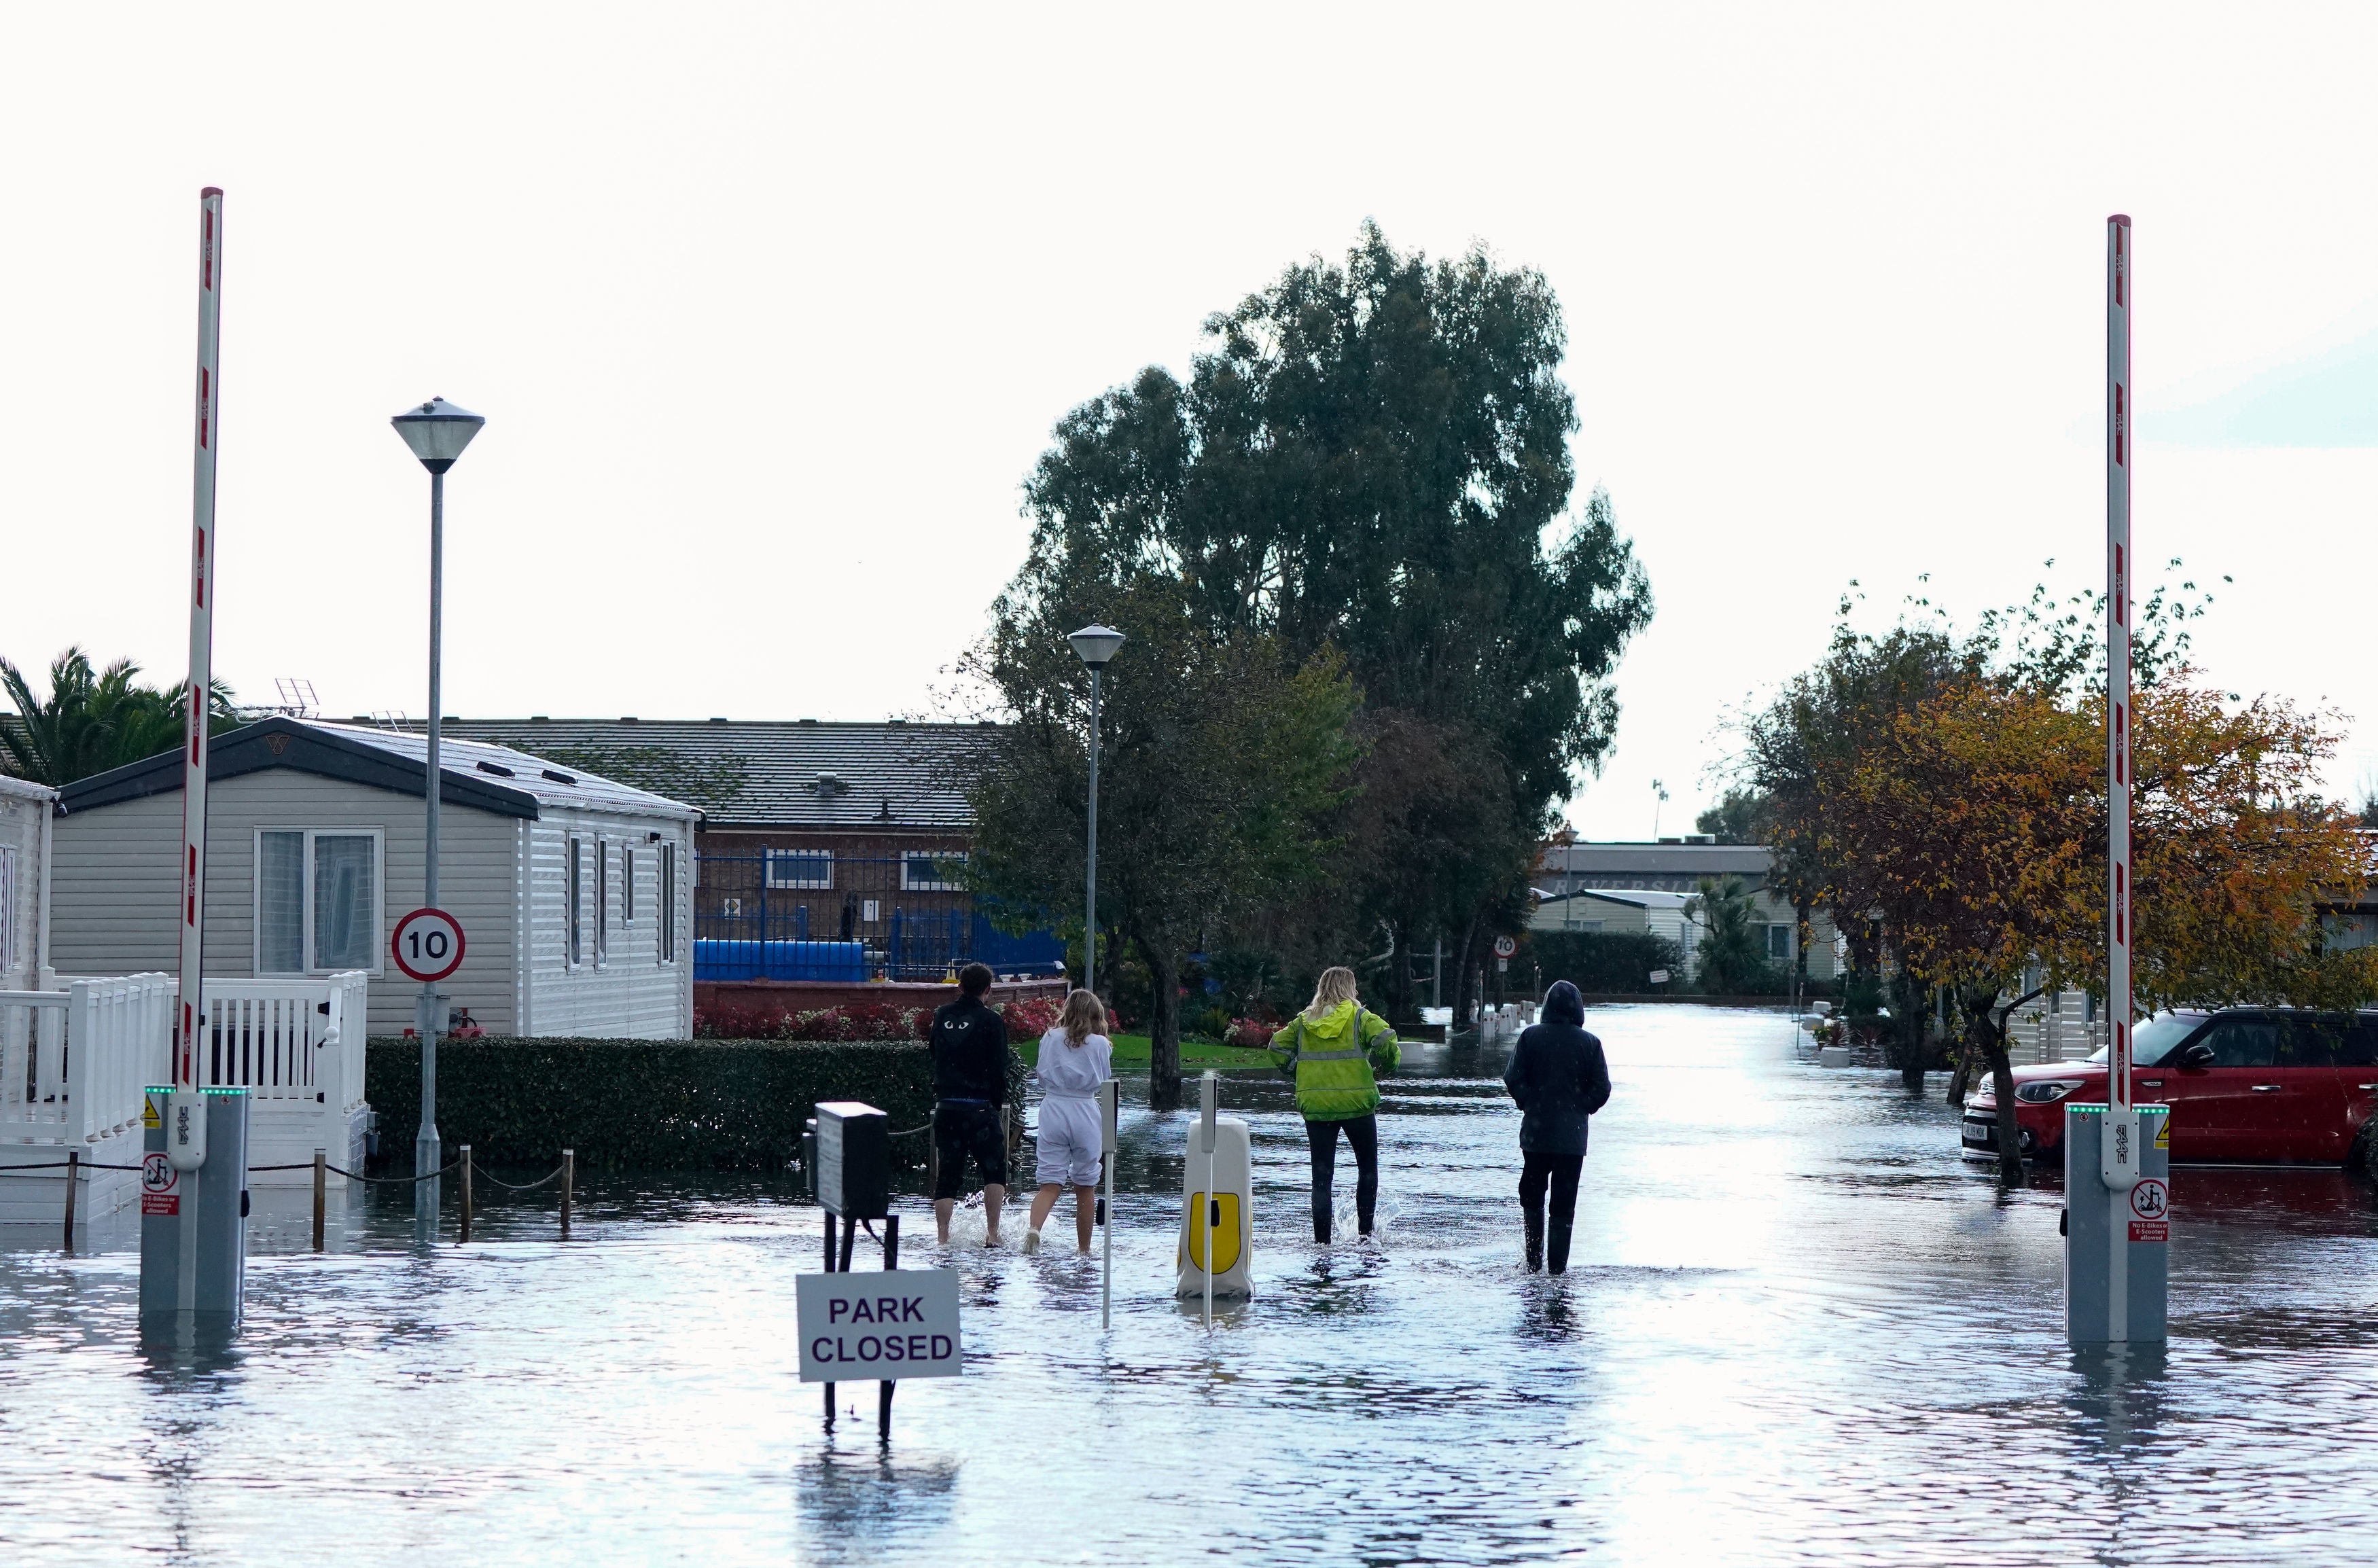 <p>A view of the entrance to the Riverside Caravan Centre in Bognor Regis which has flooded after heavy rain the area.</p>